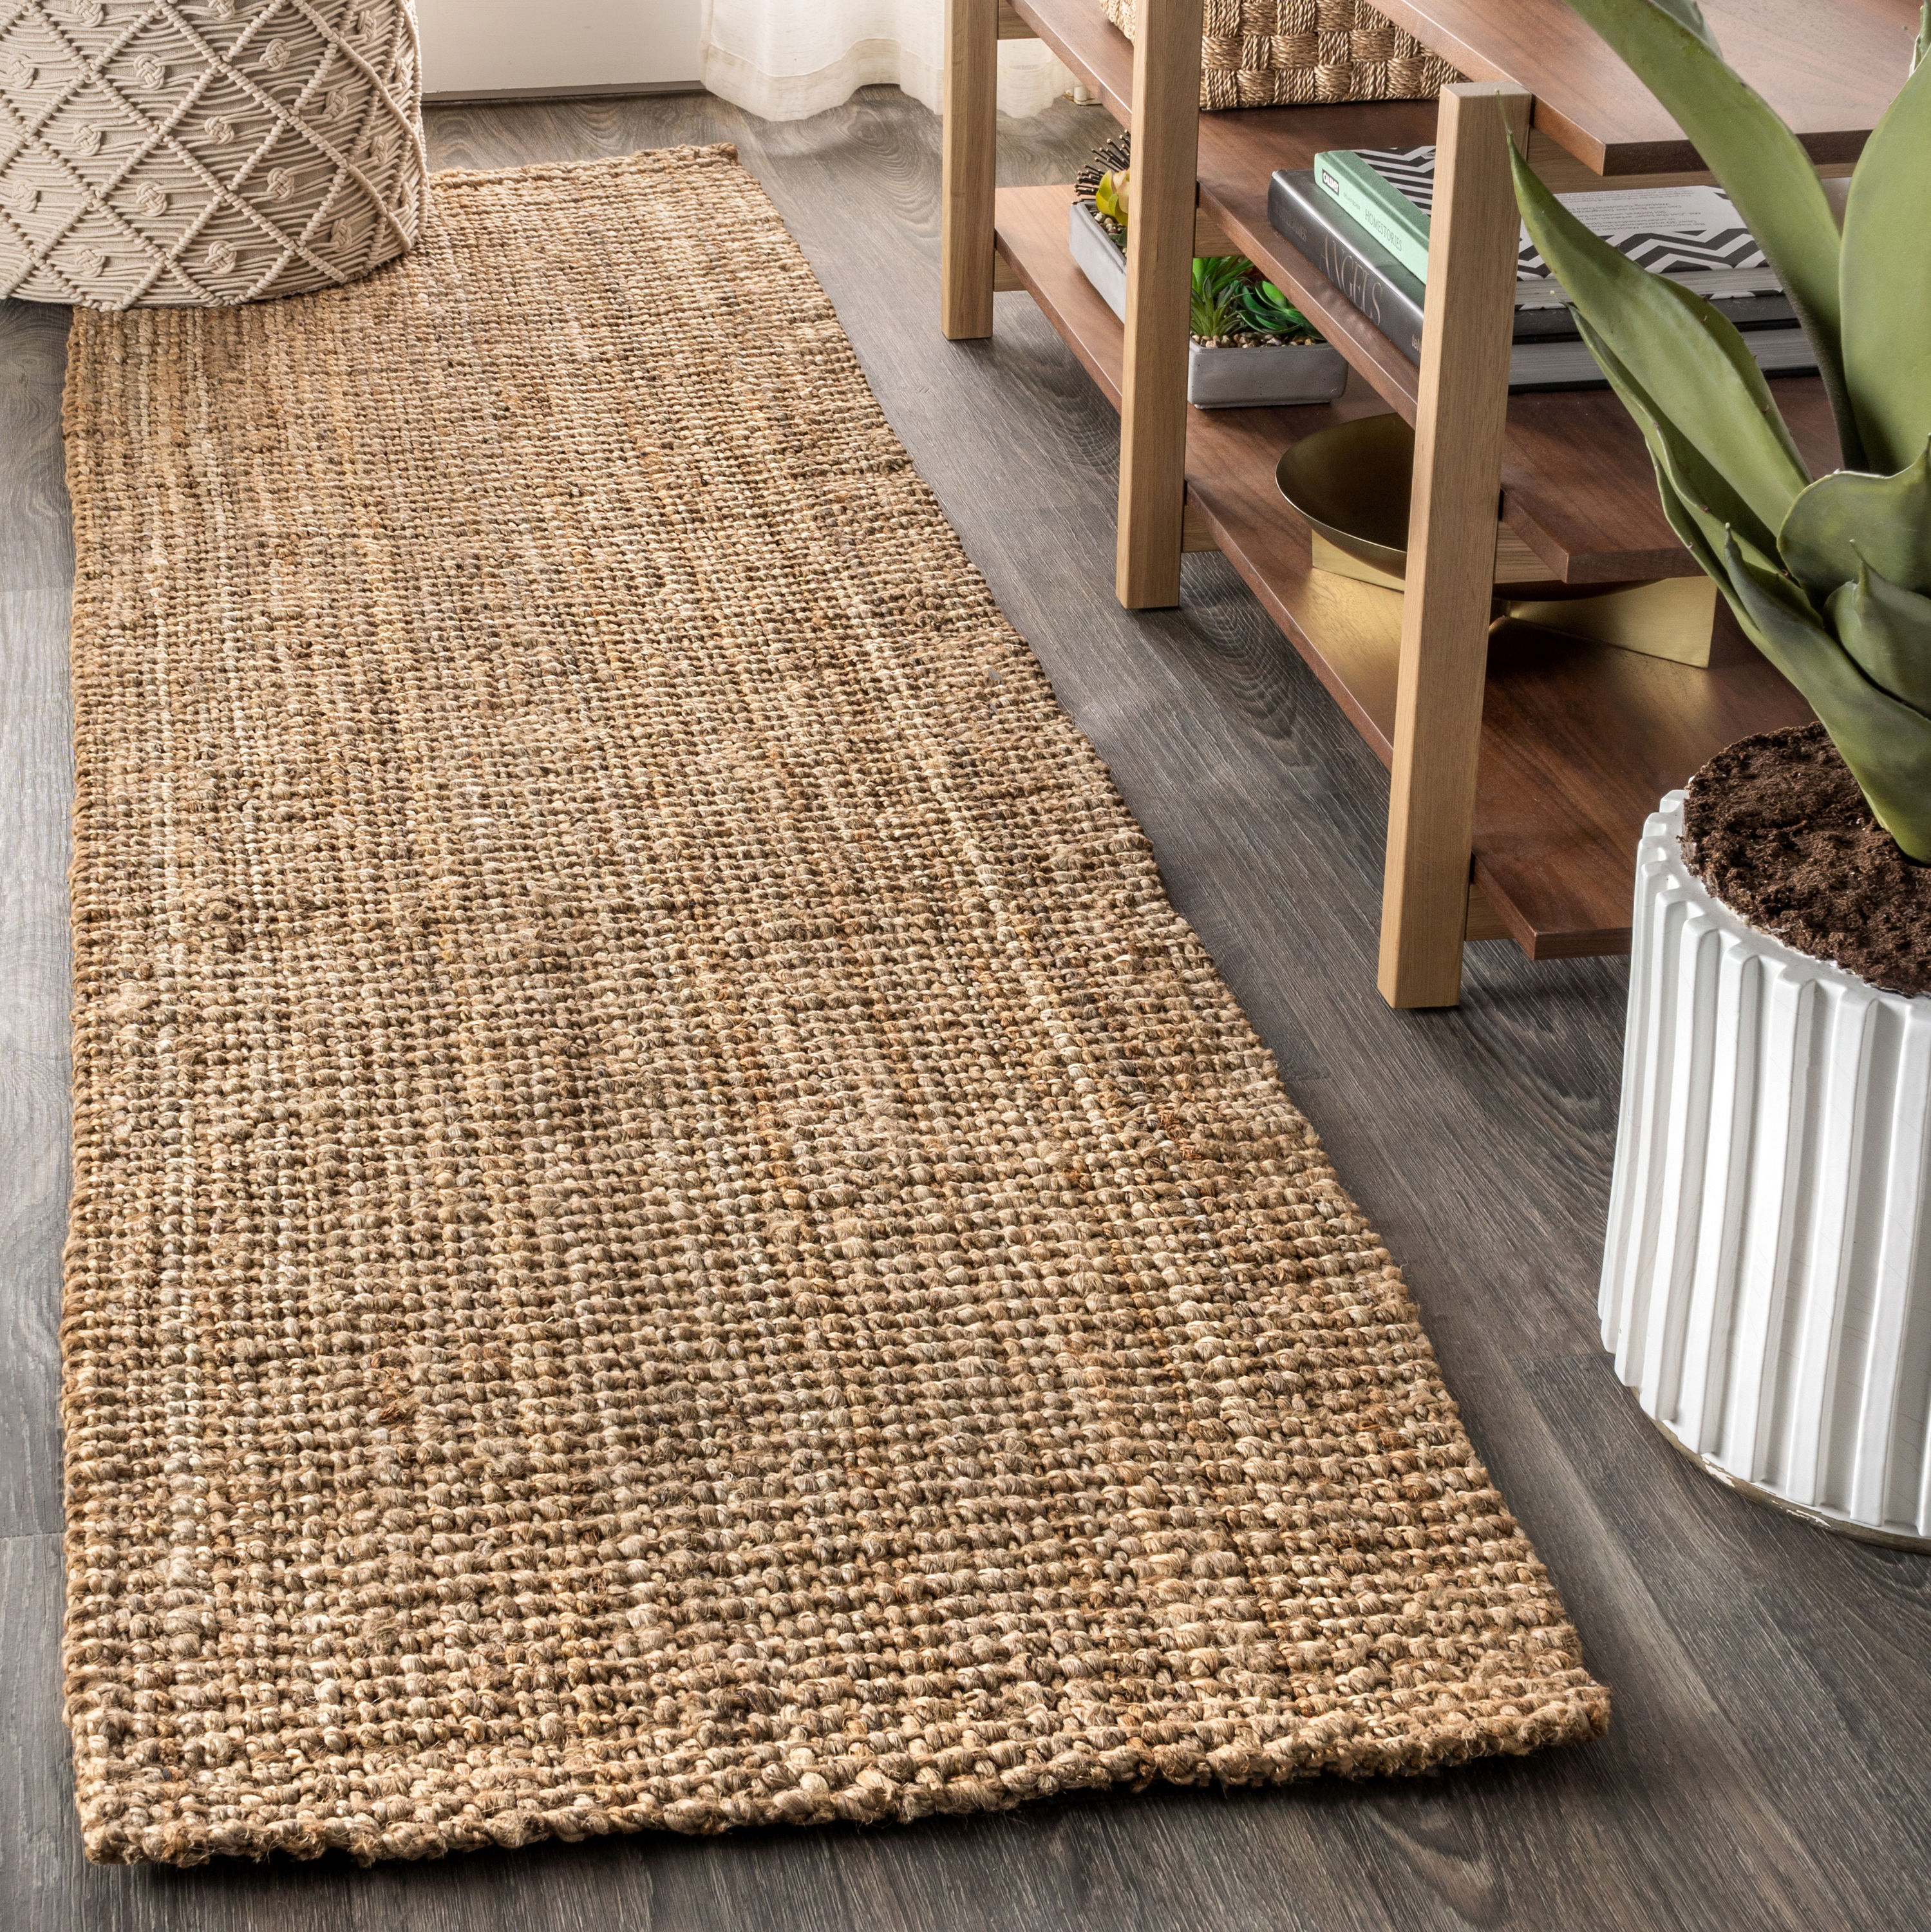 Authentic Jute Rugs: 8 Reasons Why You Can't Go Wrong!